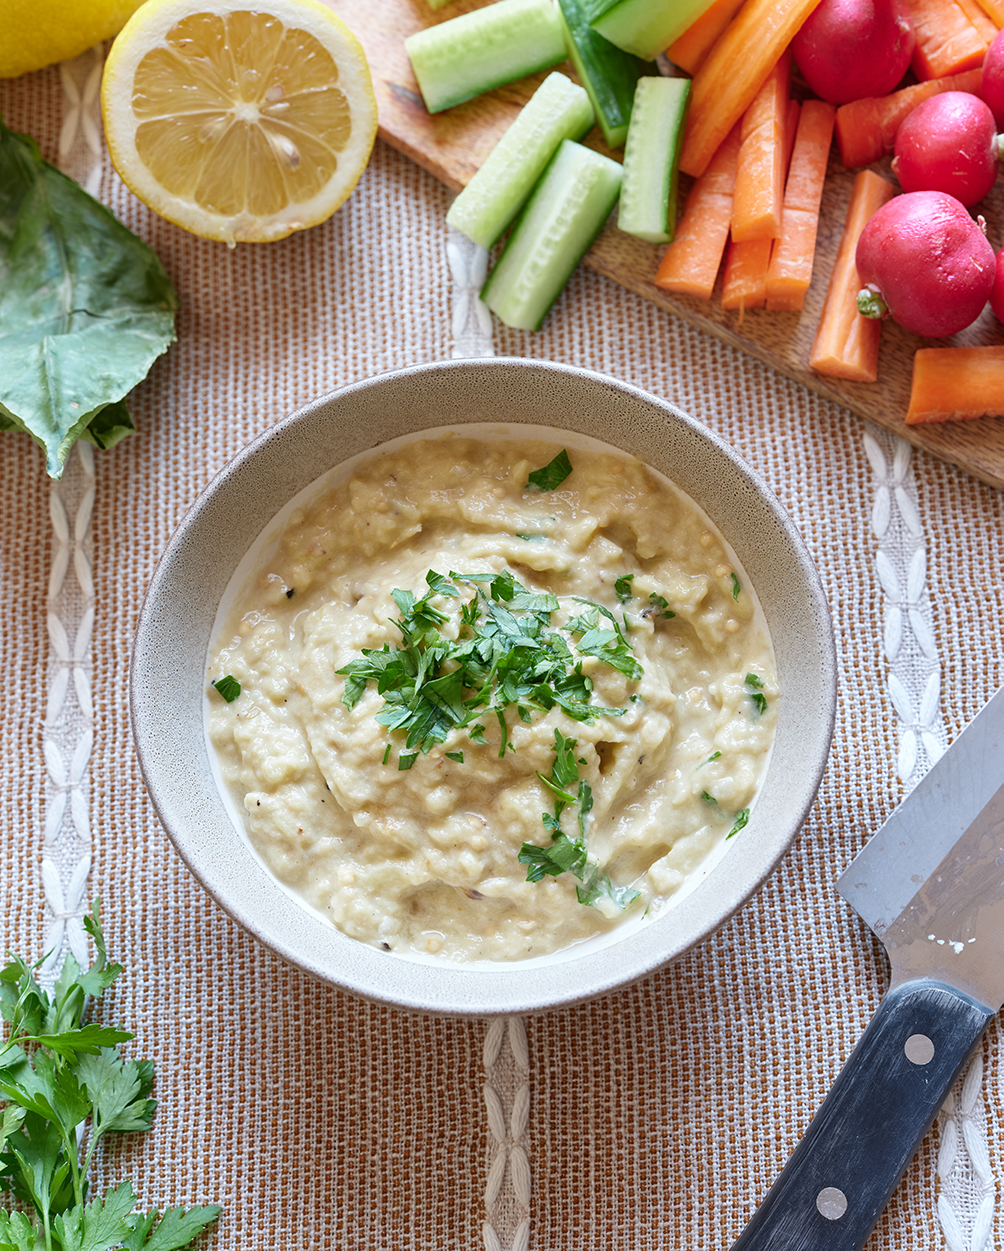 A bowl of Baba Ghanoush with a herb garnish and vegetable crudities